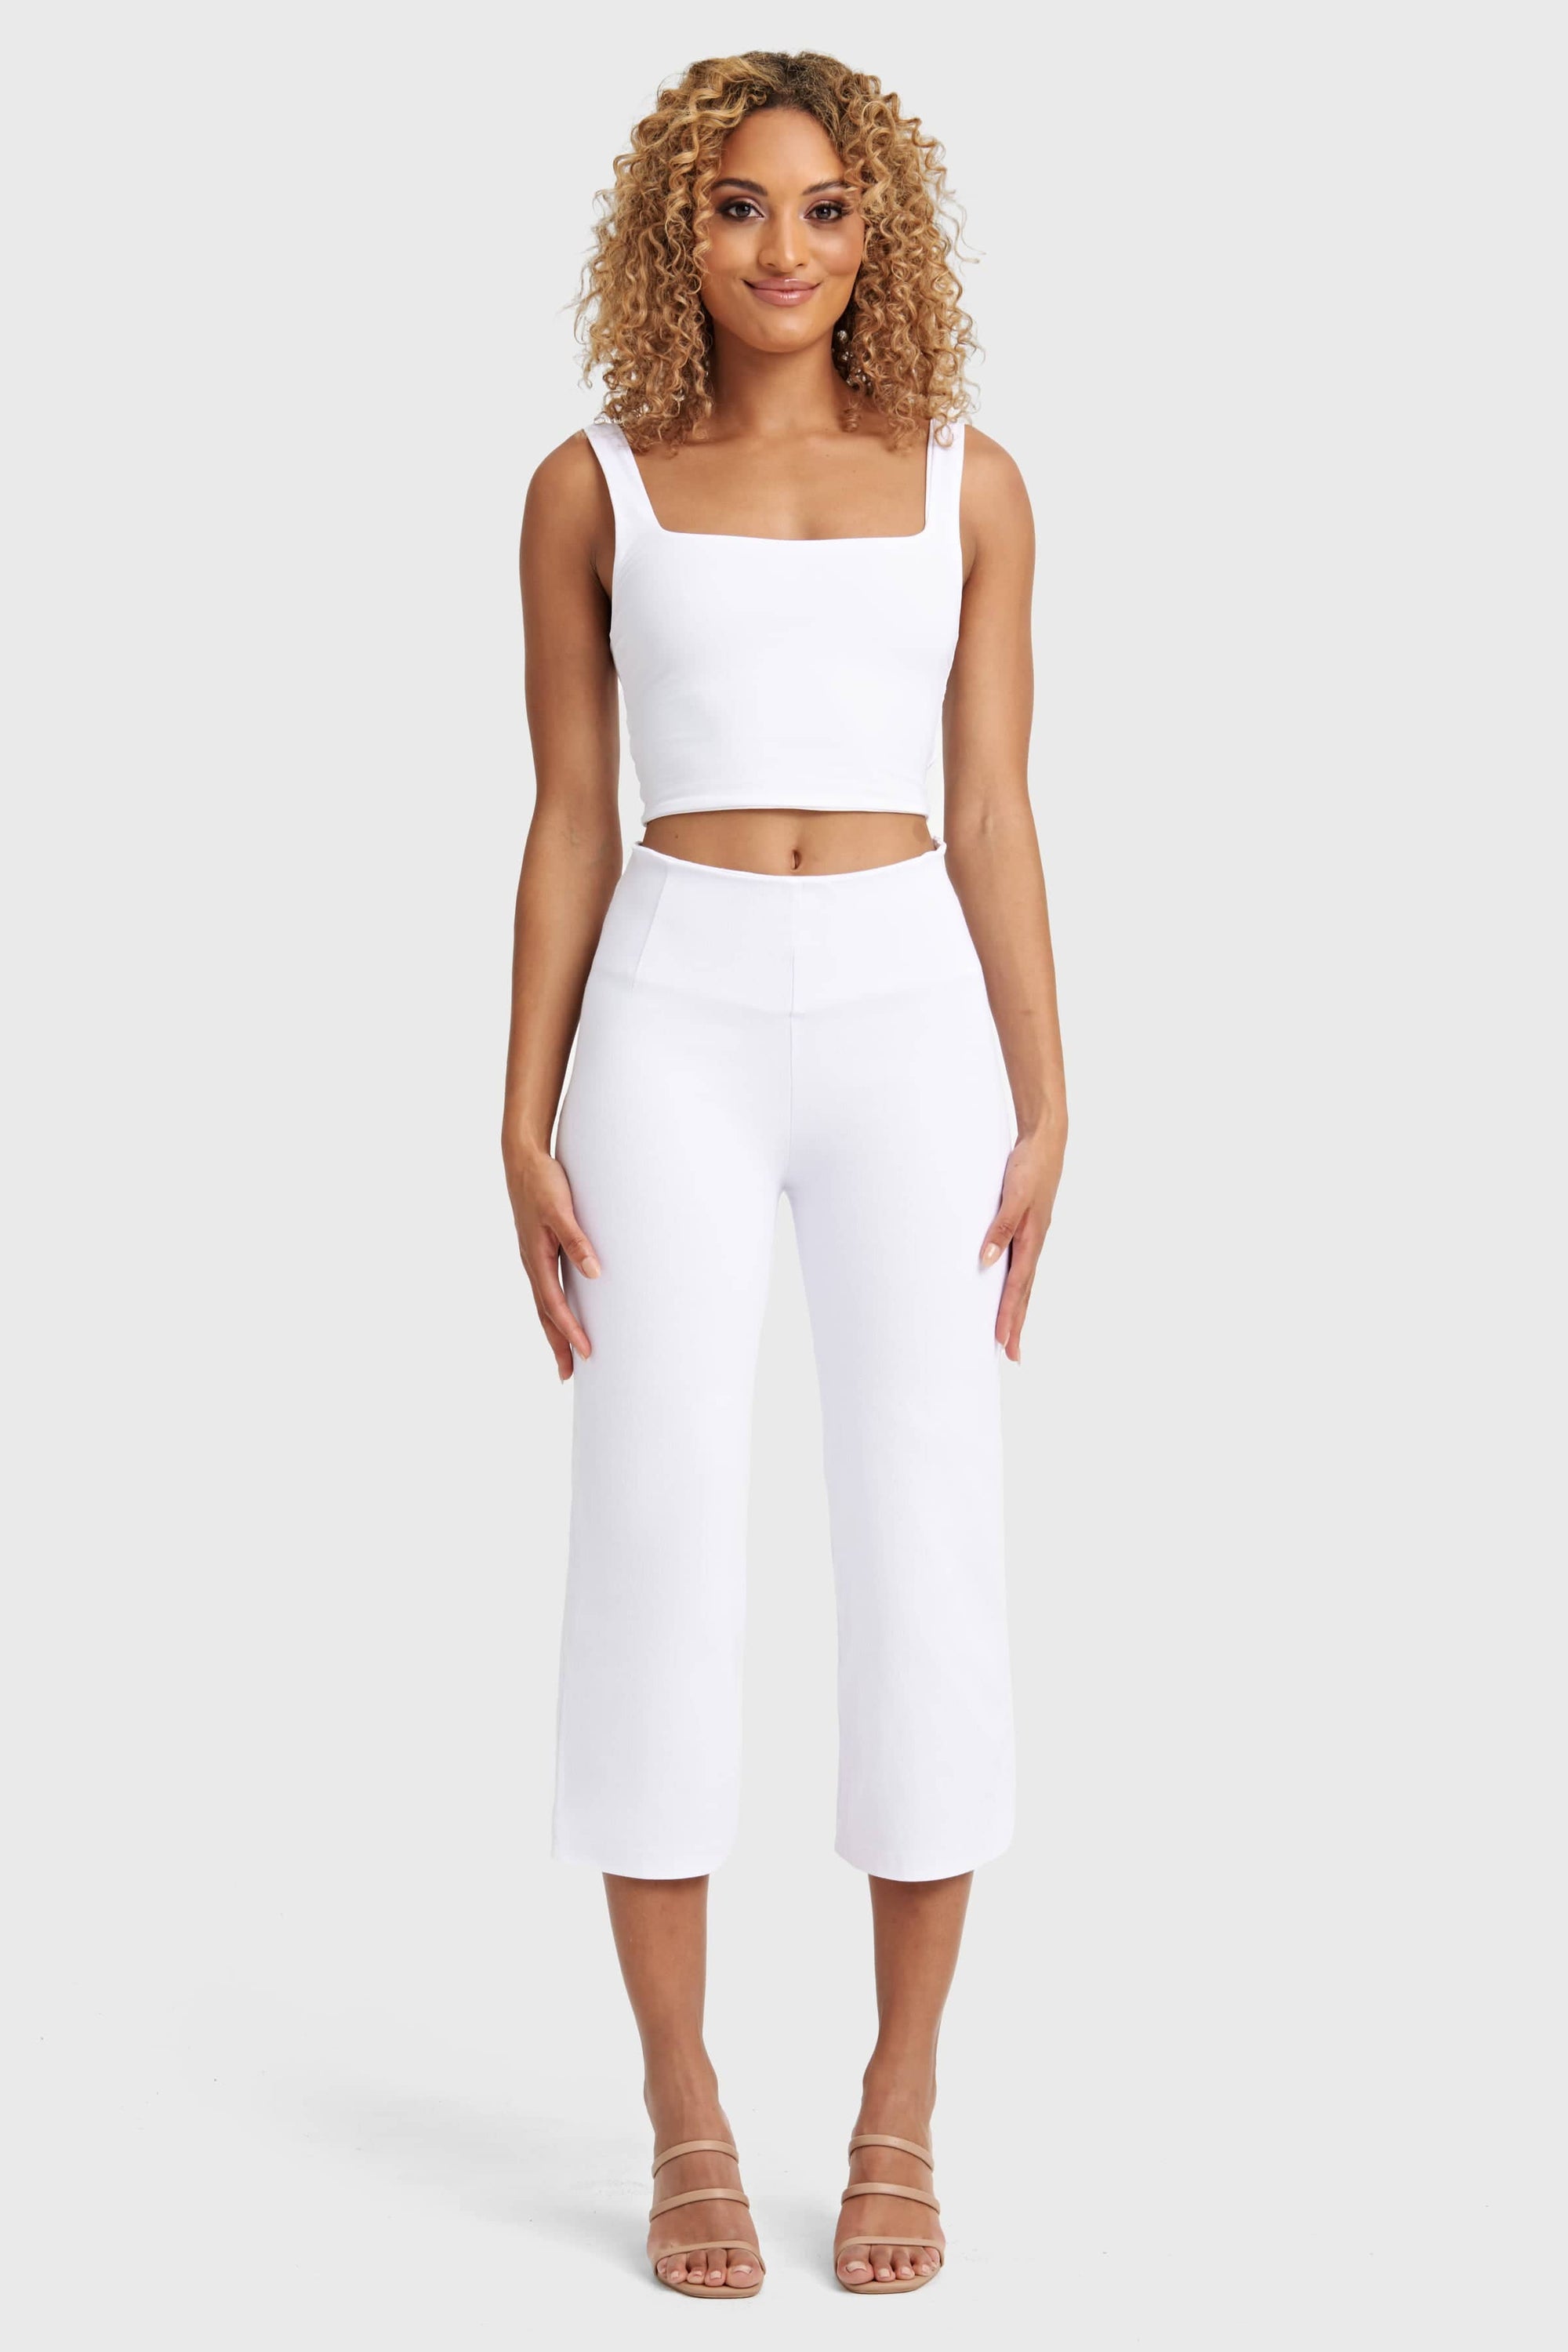 WR.UP® Snug Jeans - High Waisted - Cropped - White 6